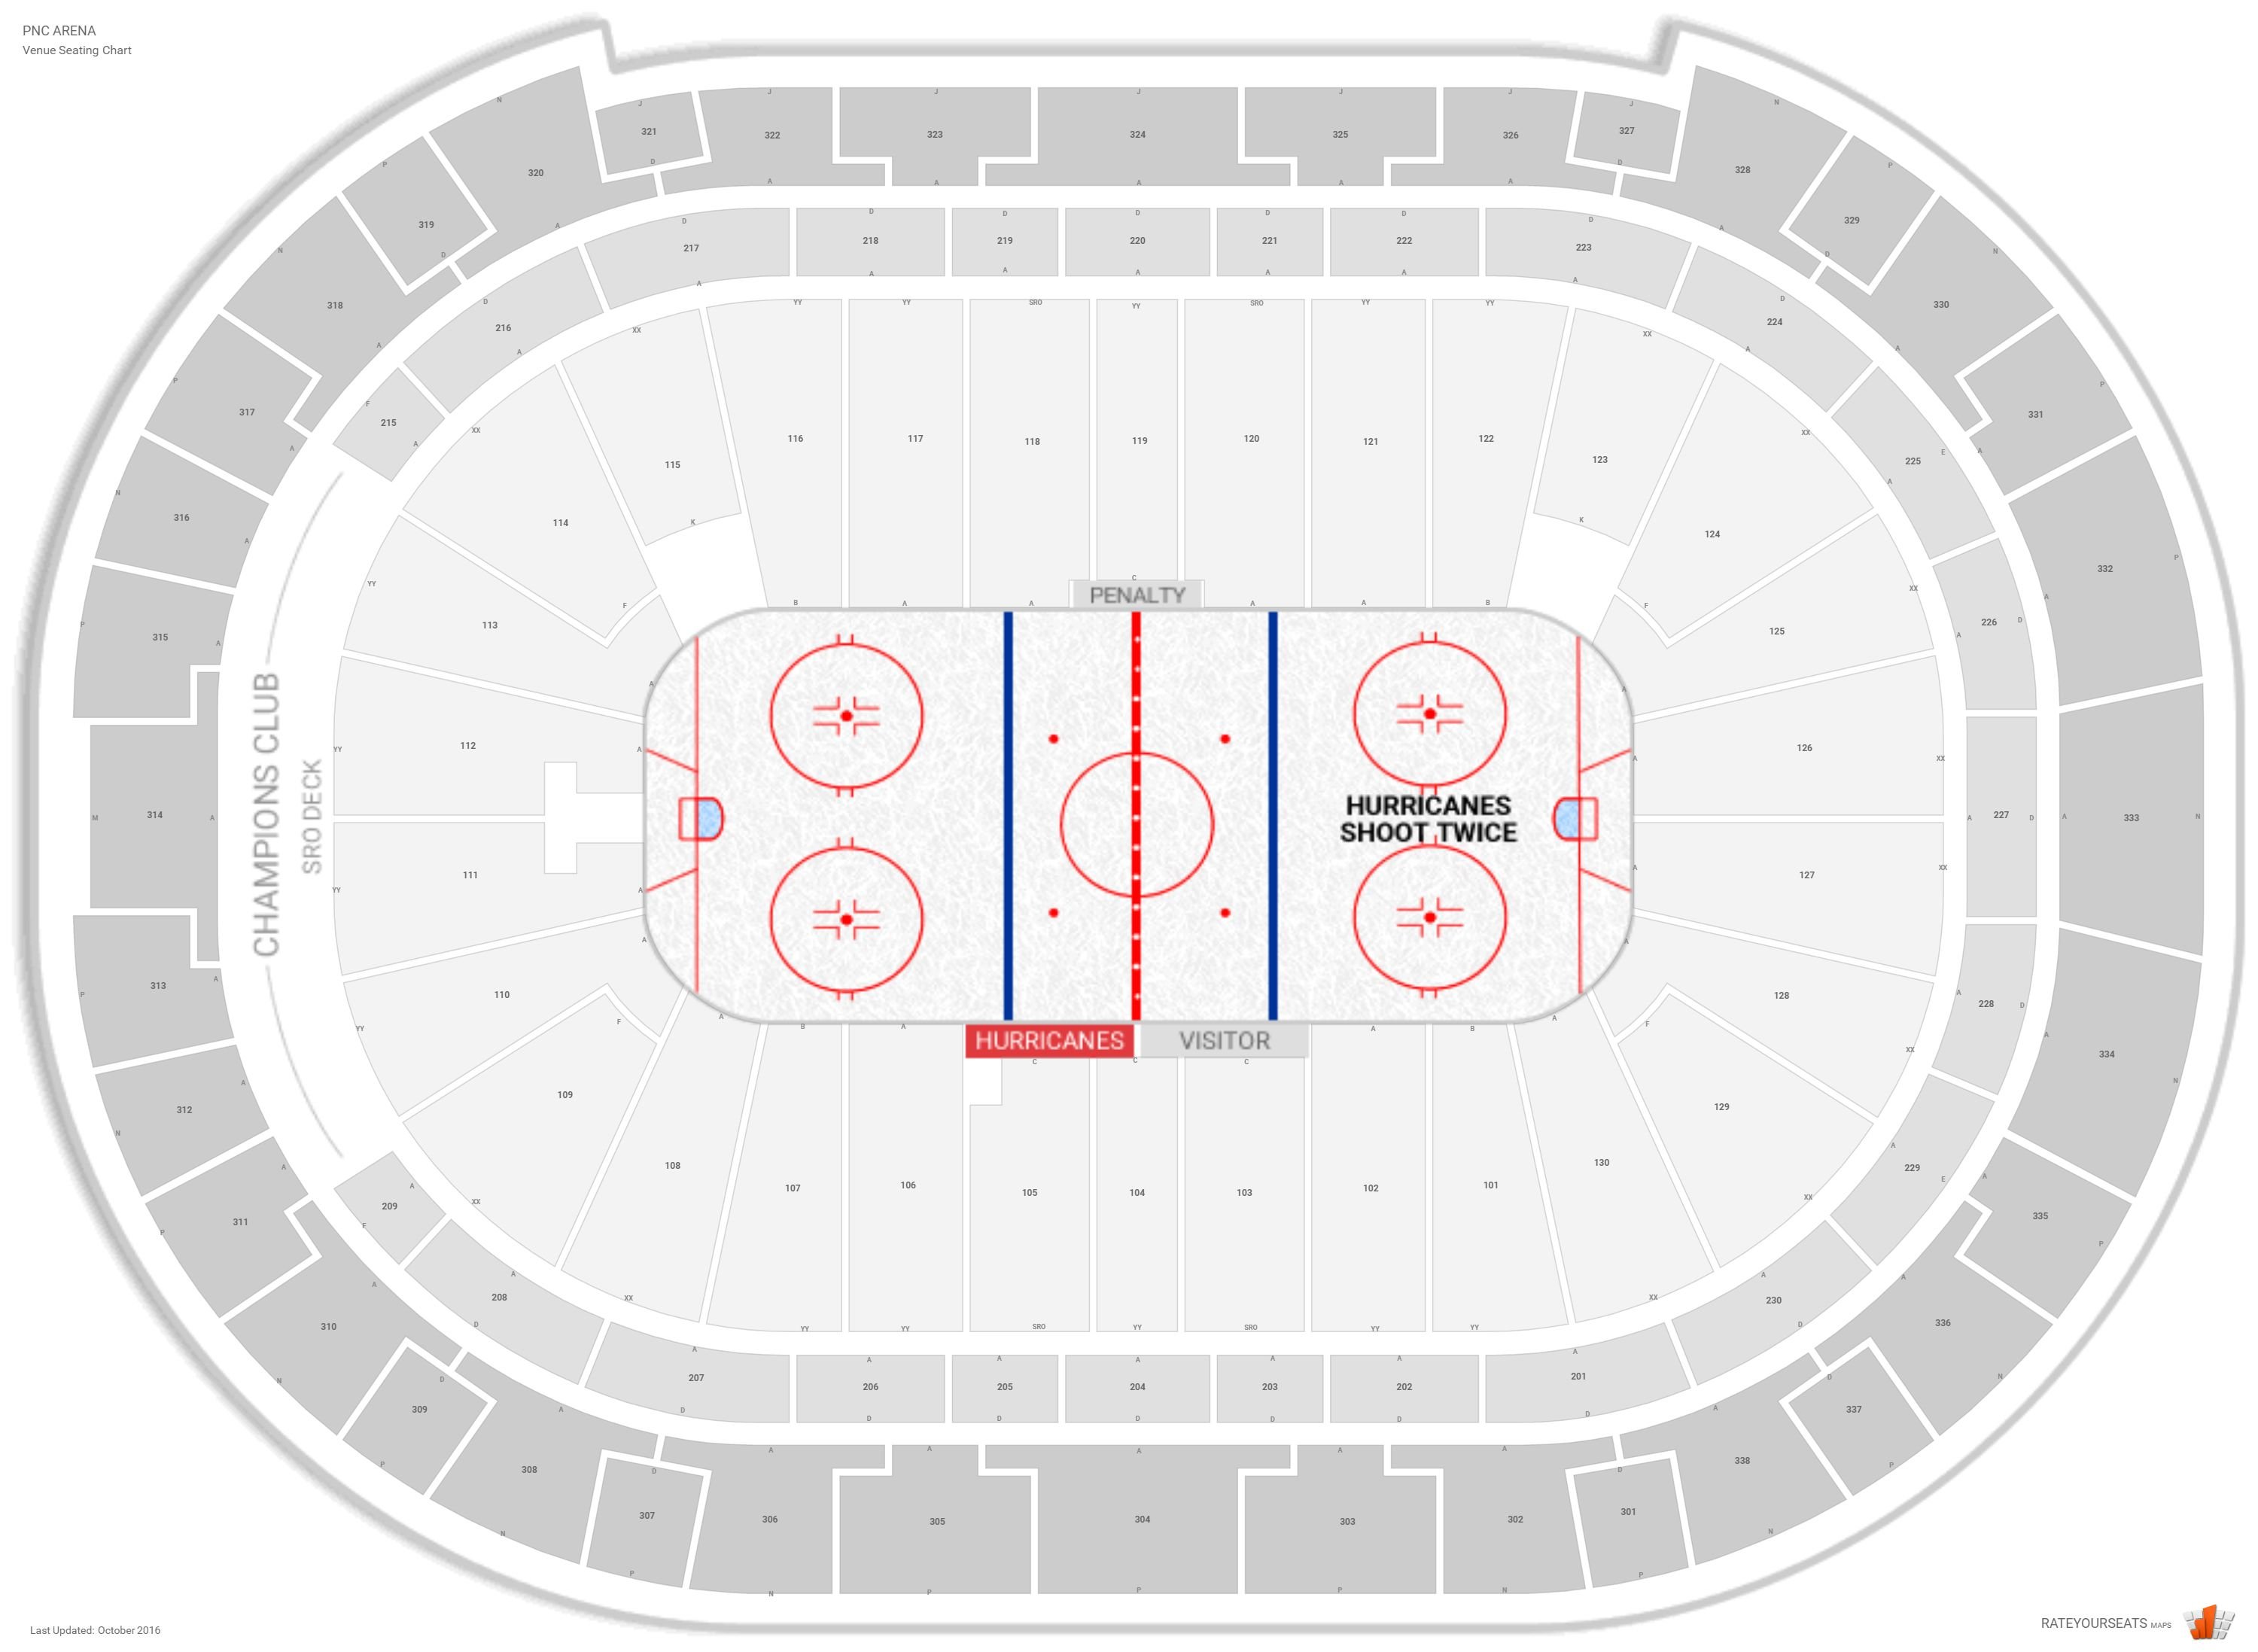 Pnc Arena Seating Chart With Rows And Seat Numbers